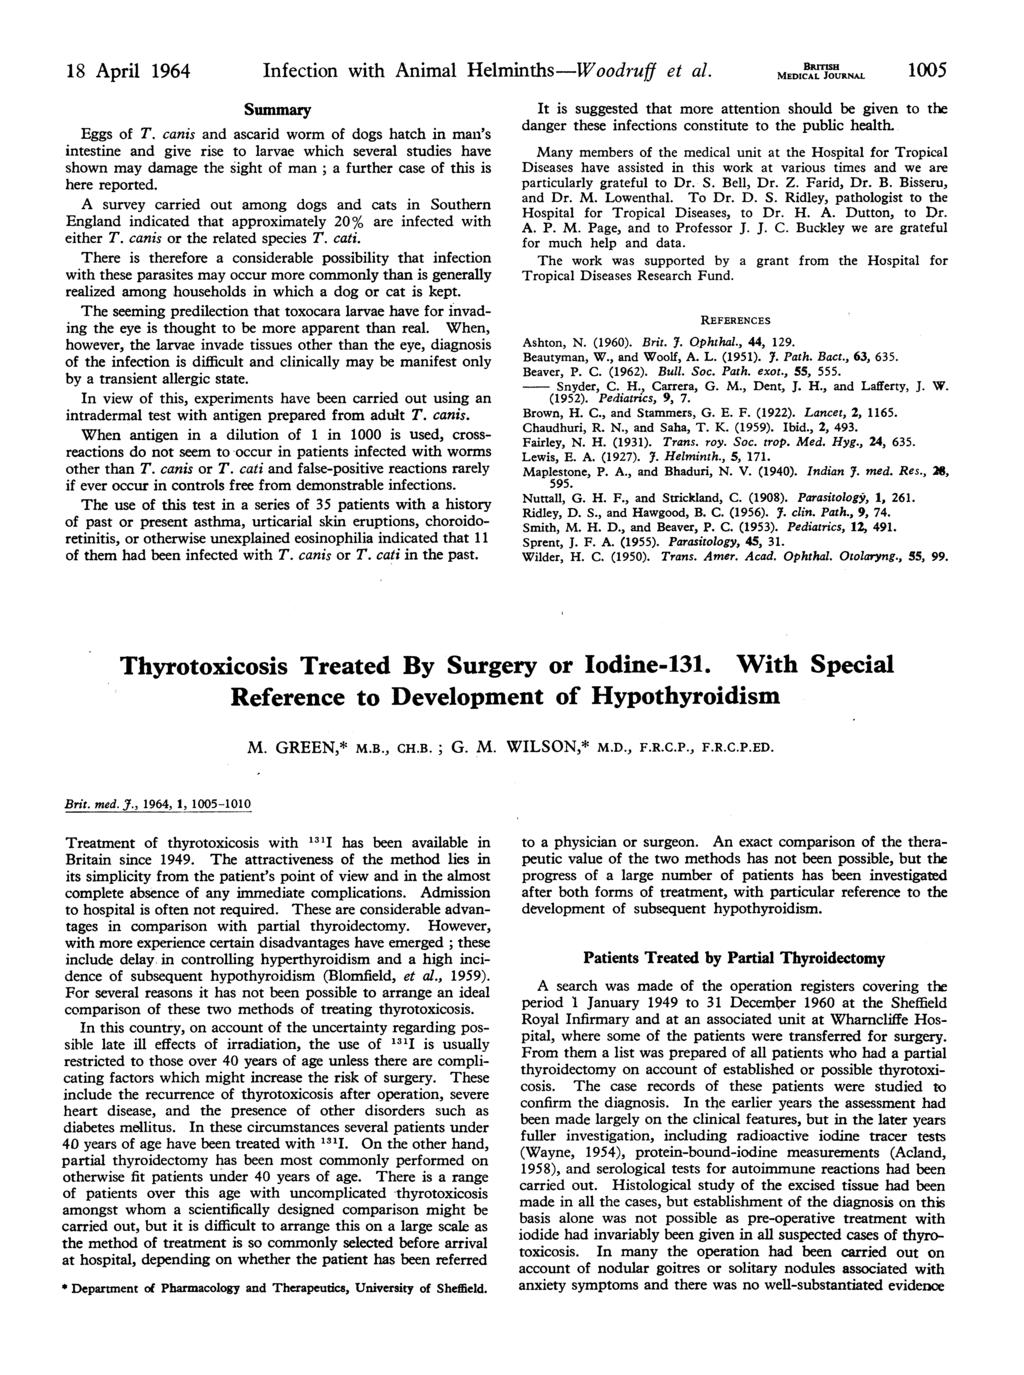 18 April 1964 Infection with Animal Helminths-Woodruff et al. EDIB[mH 1005 Summary Eggs of T.